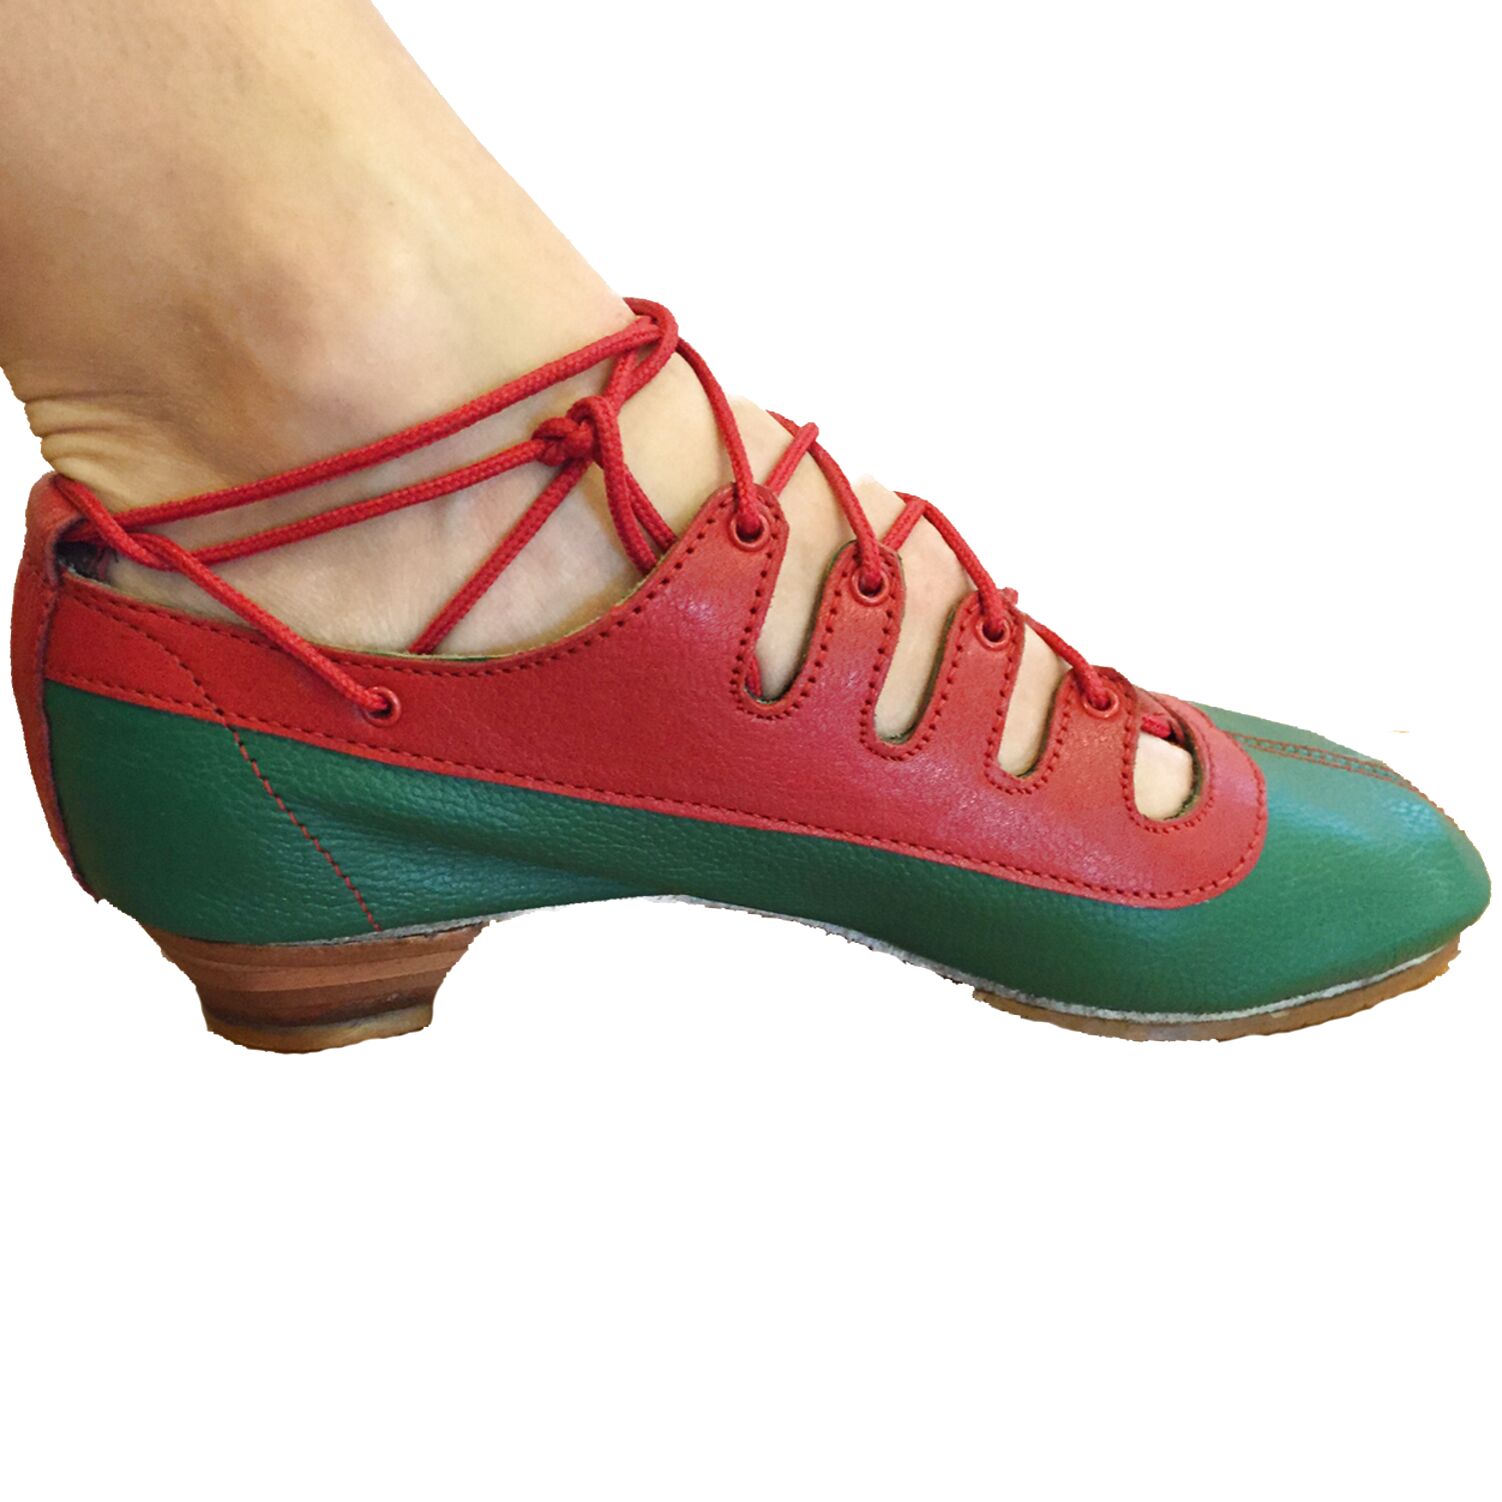 Highland Dance Jig Shoes for sale in UK 